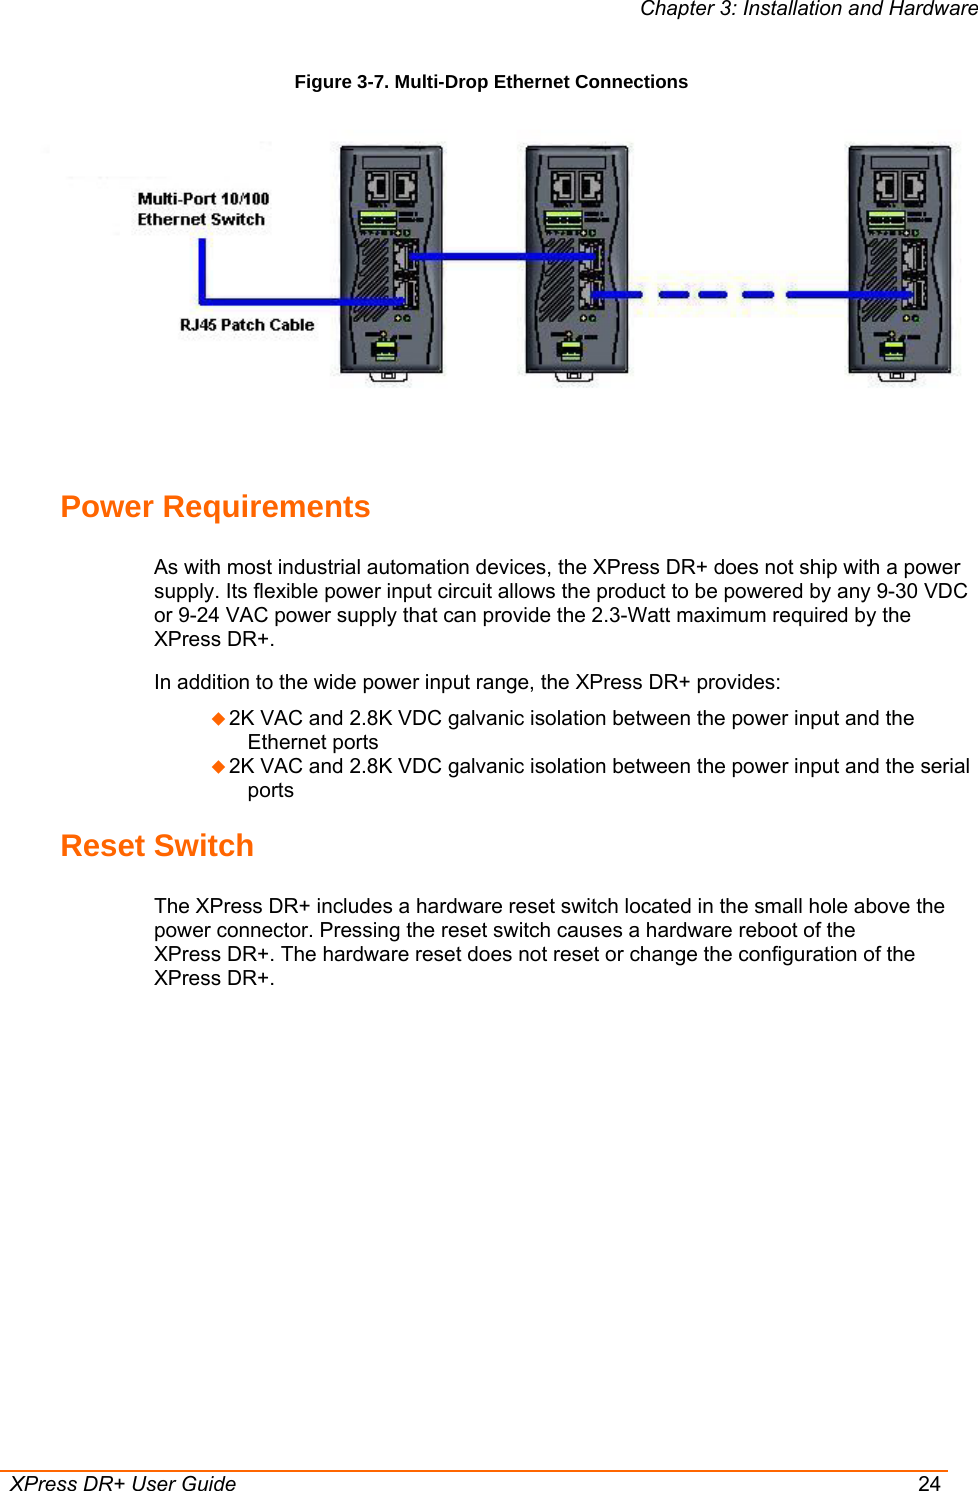 Chapter 3: Installation and Hardware  XPress DR+ User Guide  24 Figure 3-7. Multi-Drop Ethernet Connections   Power Requirements As with most industrial automation devices, the XPress DR+ does not ship with a power supply. Its flexible power input circuit allows the product to be powered by any 9-30 VDC or 9-24 VAC power supply that can provide the 2.3-Watt maximum required by the XPress DR+.   In addition to the wide power input range, the XPress DR+ provides:  2K VAC and 2.8K VDC galvanic isolation between the power input and the Ethernet ports   2K VAC and 2.8K VDC galvanic isolation between the power input and the serial ports Reset Switch The XPress DR+ includes a hardware reset switch located in the small hole above the power connector. Pressing the reset switch causes a hardware reboot of the XPress DR+. The hardware reset does not reset or change the configuration of the XPress DR+. 